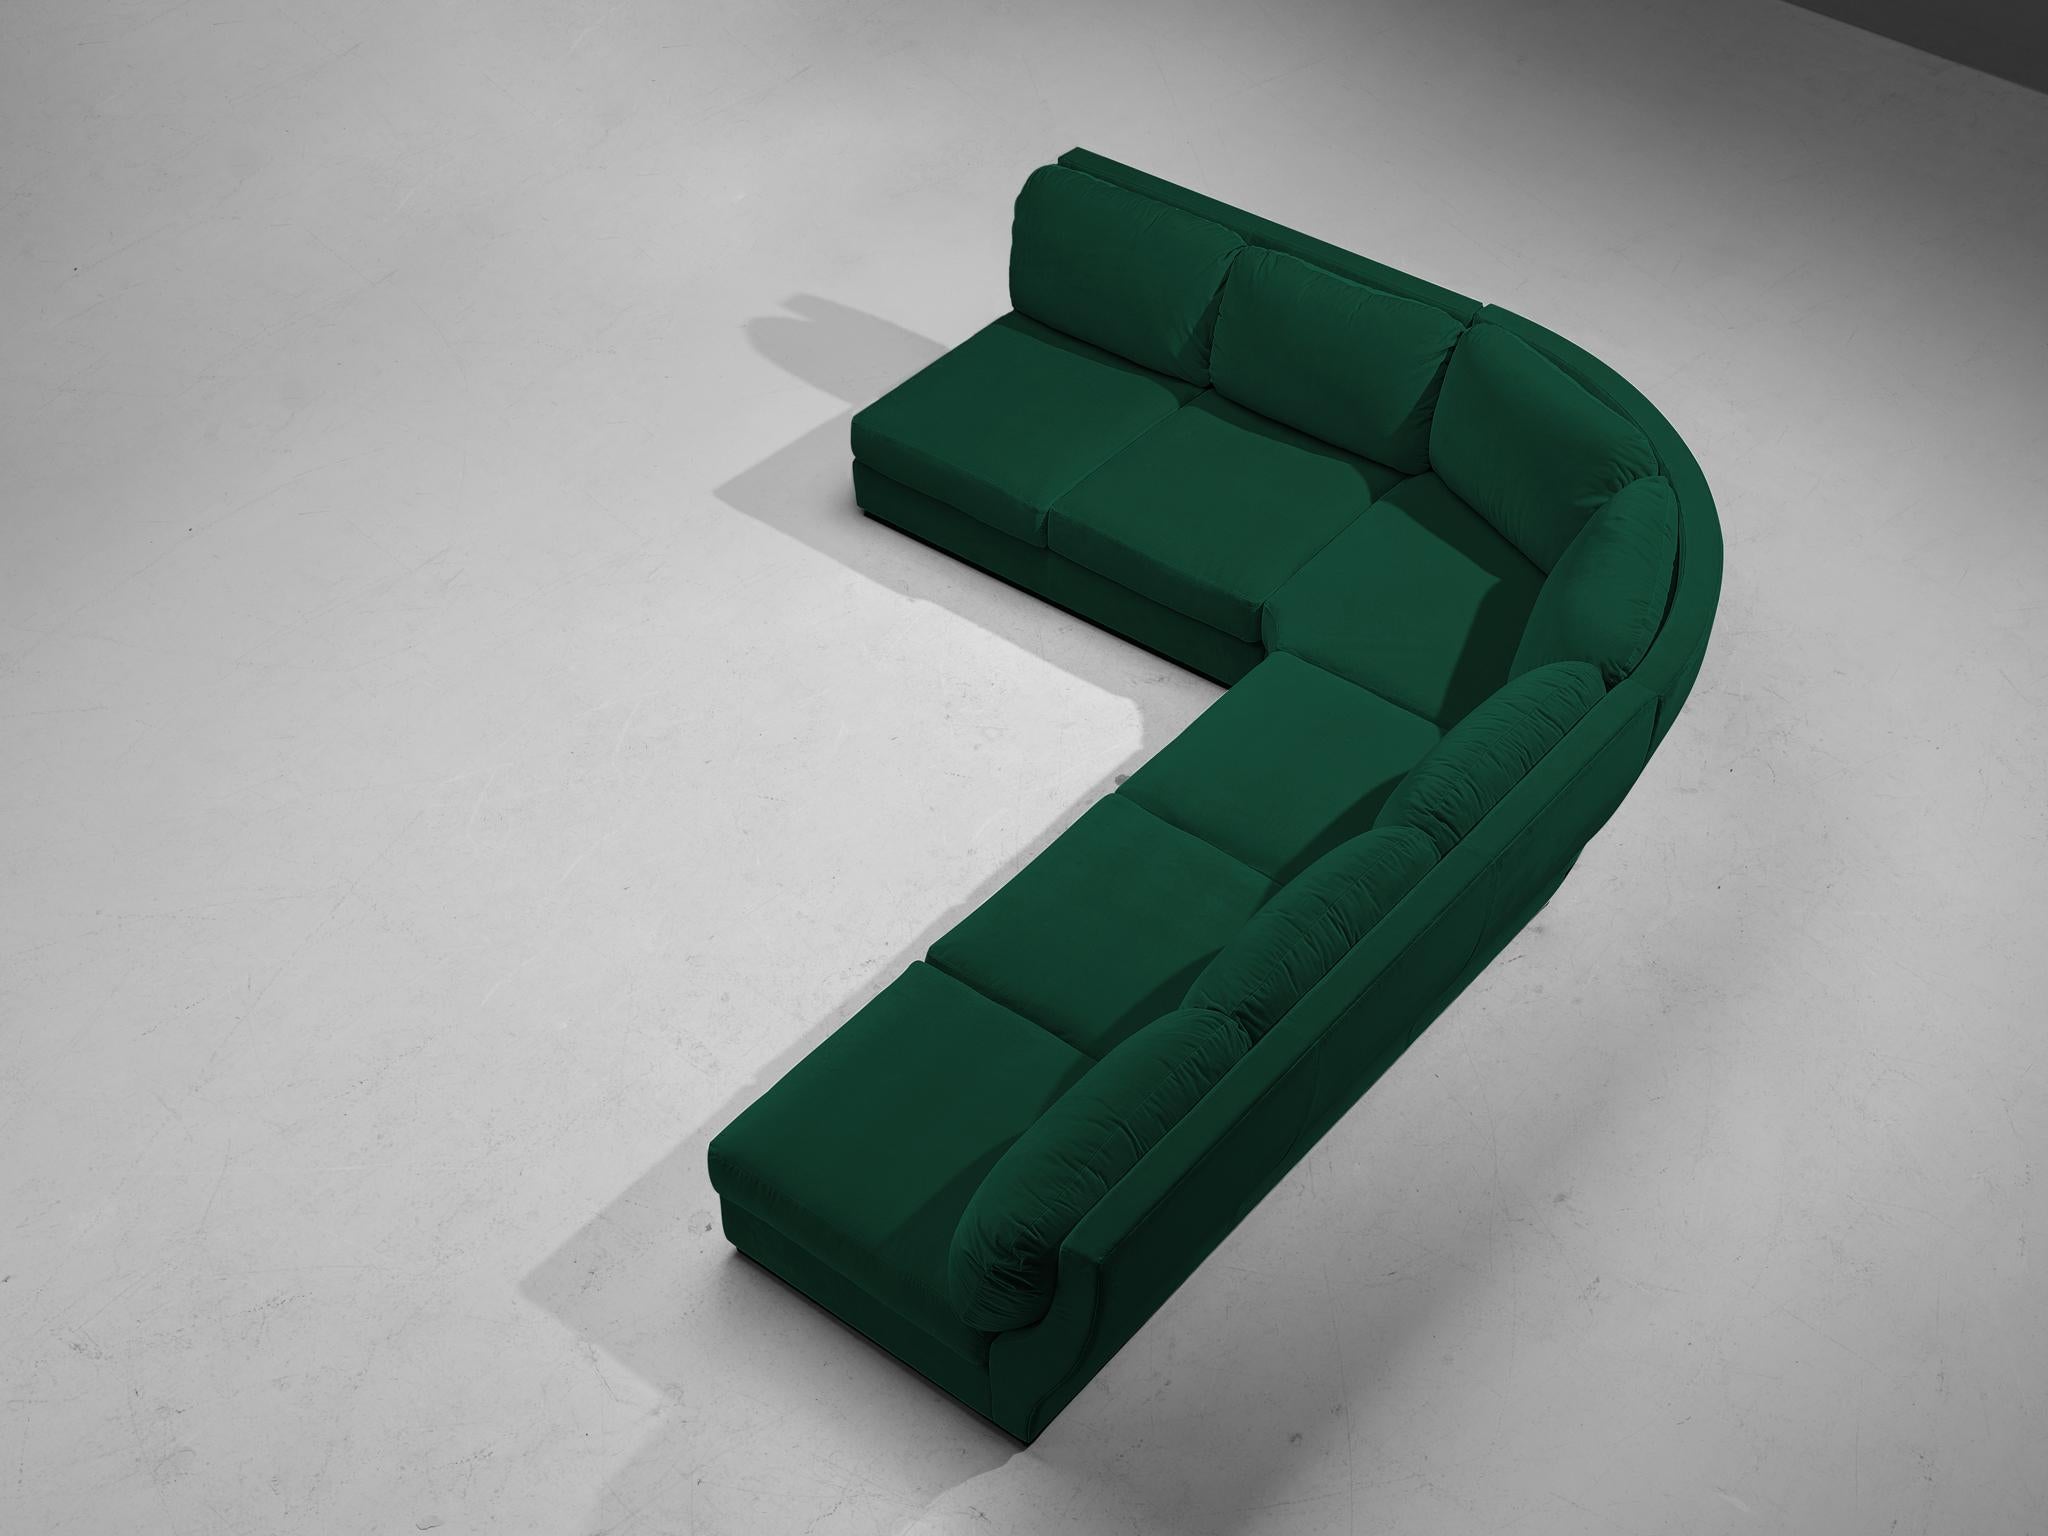 Willy Rizzo for Mario Sabot, sectional corner sofa, Kvadrat Harald 3 - 0952, wood, Italy, 1970s.

This rare sofa is designed by Willy Rizzo in the 1970s. This alignment consists of six elements. The cushions as well as the frame are upholstered in a